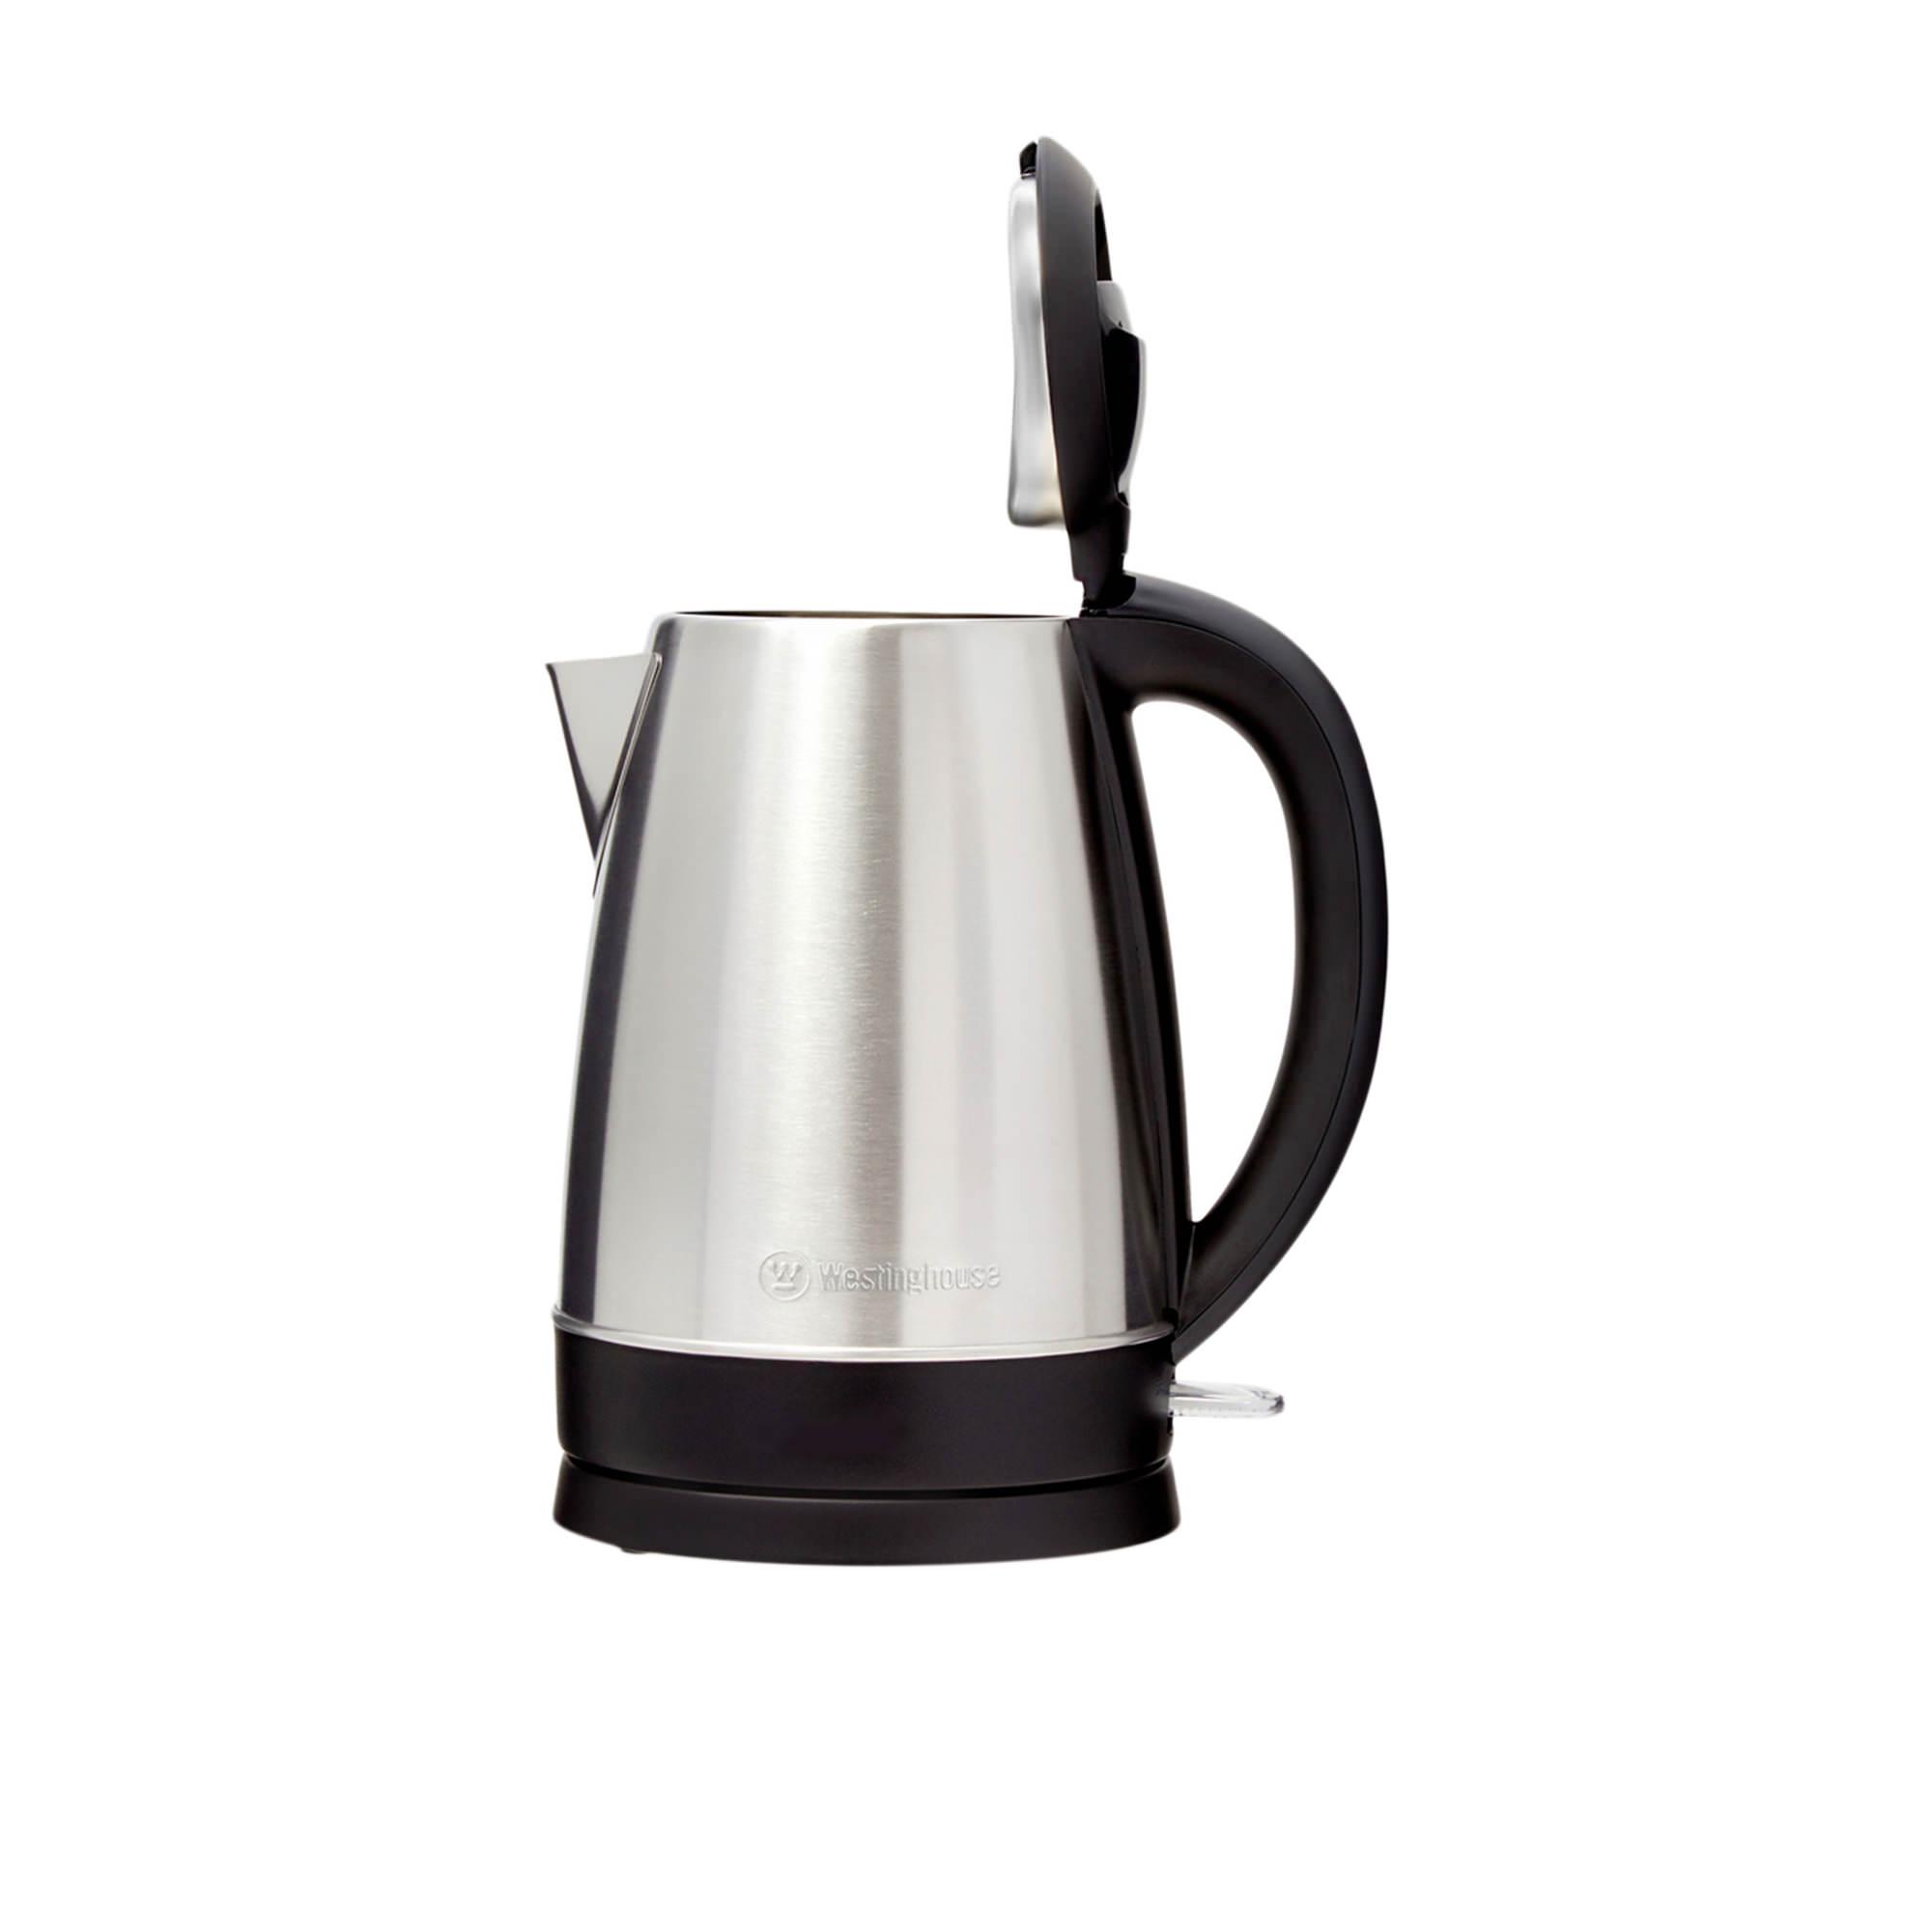 Westinghouse Stainless Steel Electric Kettle 1.7L Image 5